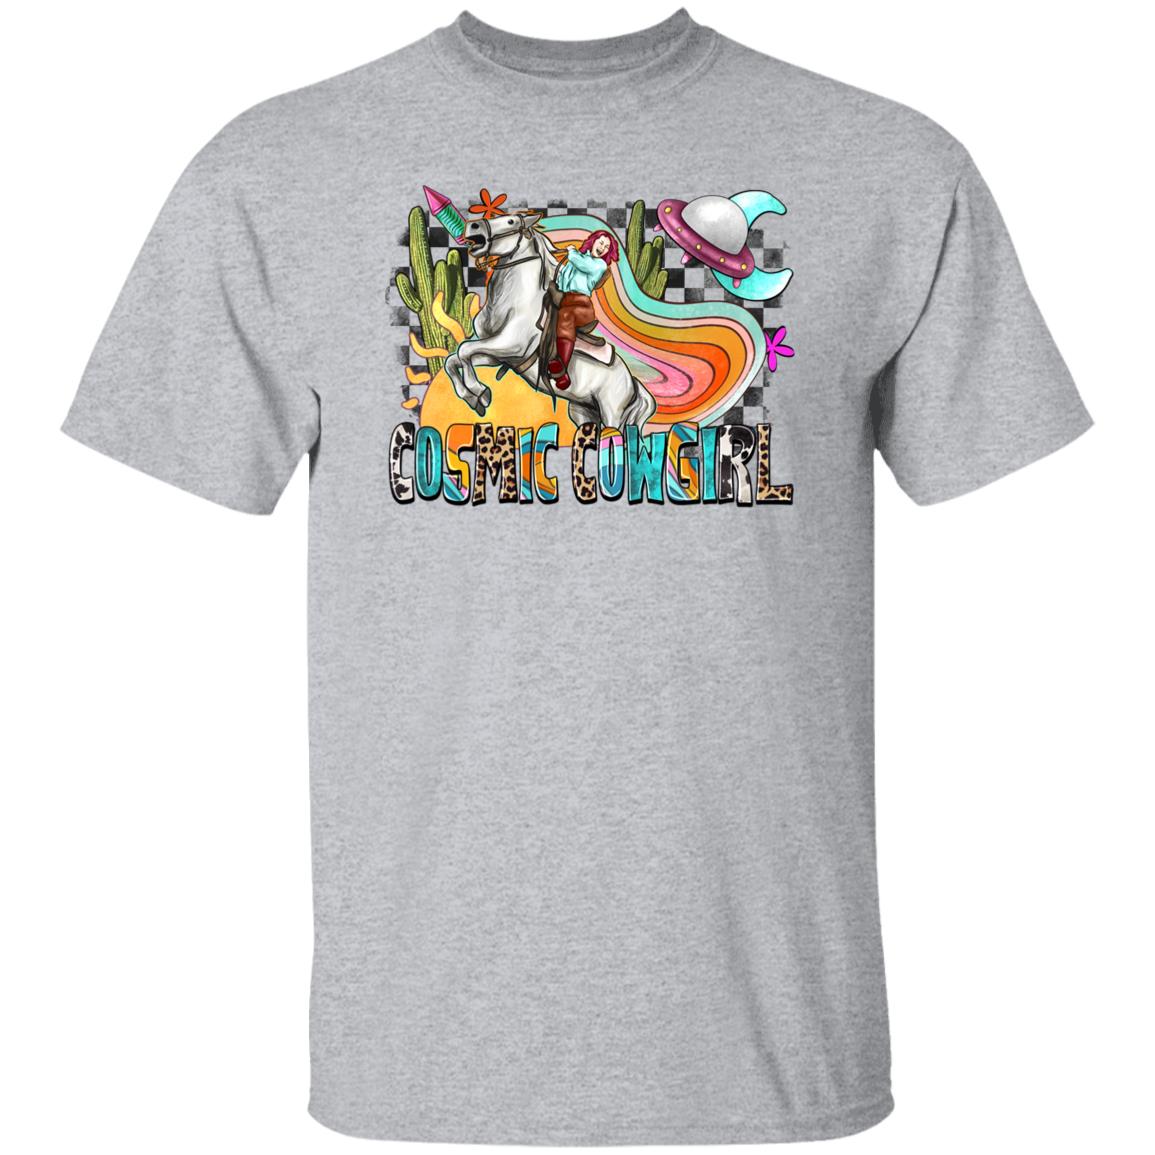 Cosmic cowgirl T-Shirt Alien Texas Western horse cowgirl Unisex tee White Sand Sport Grey-Family-Gift-Planet